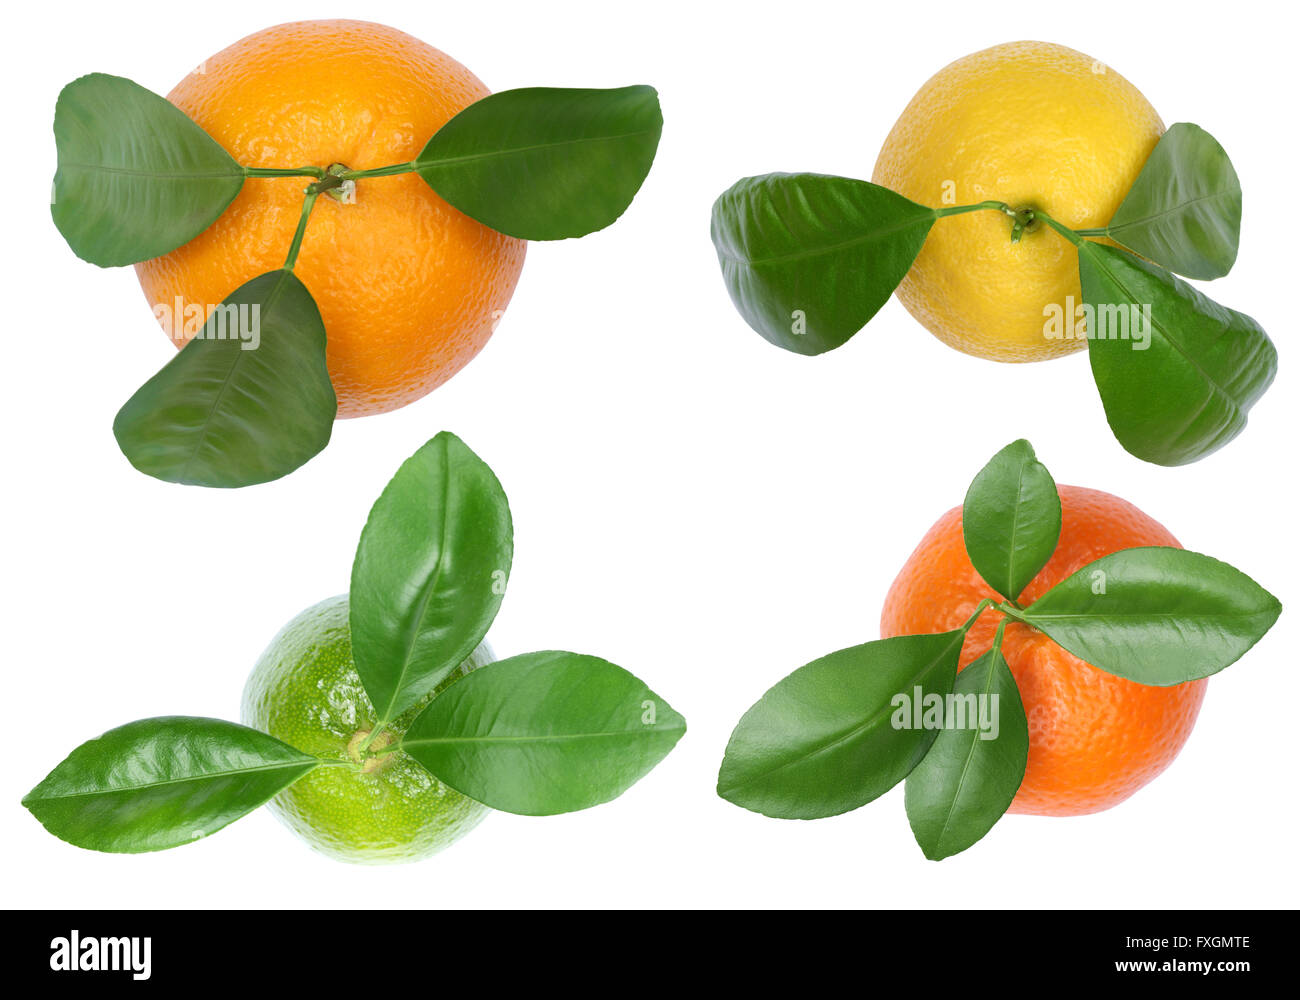 Collection of oranges mandarins lemons top view fruits isolated on a white background Stock Photo